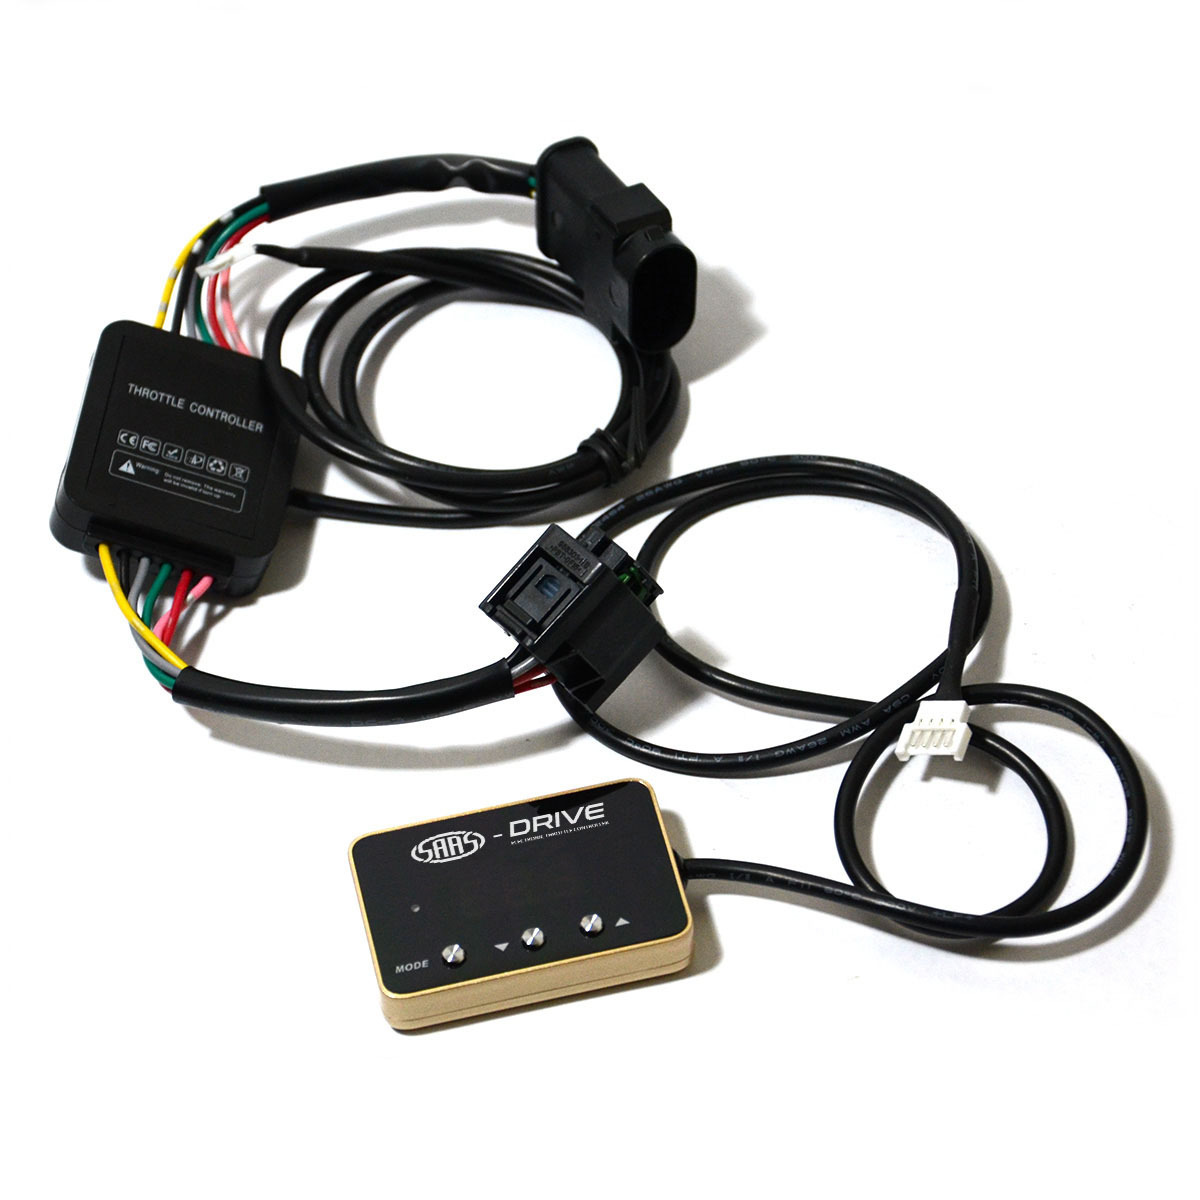 SAAS-Drive Throttle Controller suit JMC and more